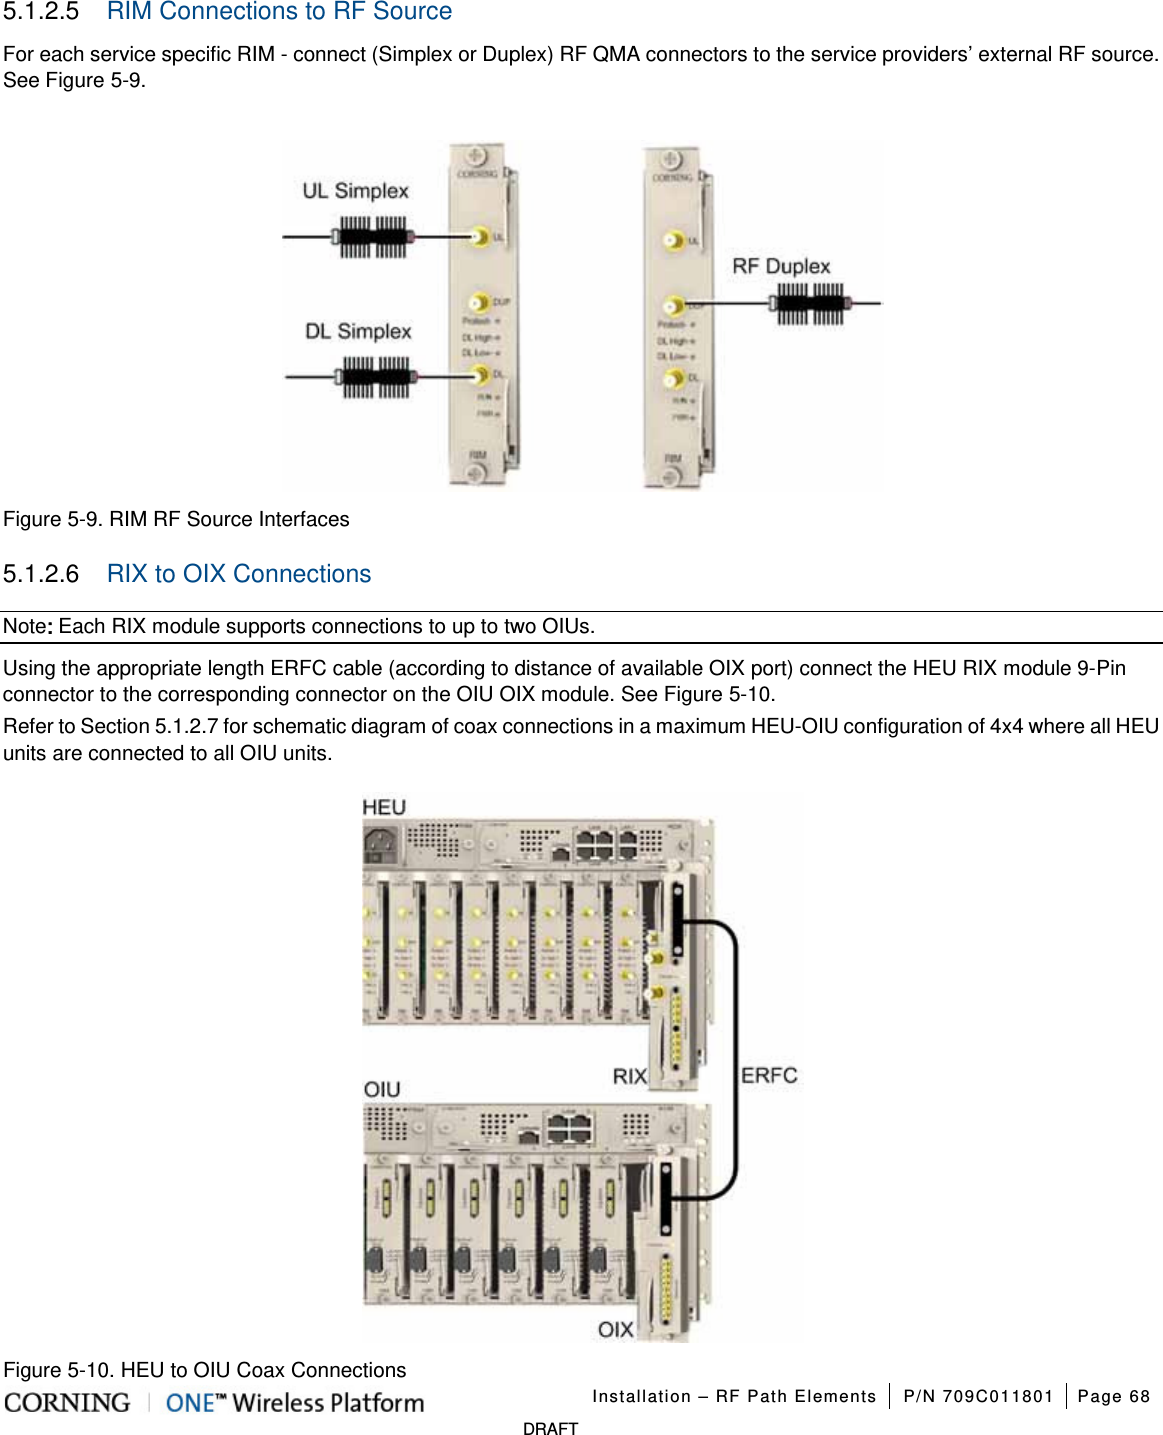   Installation – RF Path Elements P/N 709C011801 Page 68   DRAFT 5.1.2.5  RIM Connections to RF Source For each service specific RIM - connect (Simplex or Duplex) RF QMA connectors to the service providers’ external RF source. See Figure  5-9.   Figure  5-9. RIM RF Source Interfaces 5.1.2.6  RIX to OIX Connections Note: Each RIX module supports connections to up to two OIUs.   Using the appropriate length ERFC cable (according to distance of available OIX port) connect the HEU RIX module 9-Pin connector to the corresponding connector on the OIU OIX module. See Figure  5-10. Refer to Section  5.1.2.7 for schematic diagram of coax connections in a maximum HEU-OIU configuration of 4x4 where all HEU units are connected to all OIU units.   Figure  5-10. HEU to OIU Coax Connections 